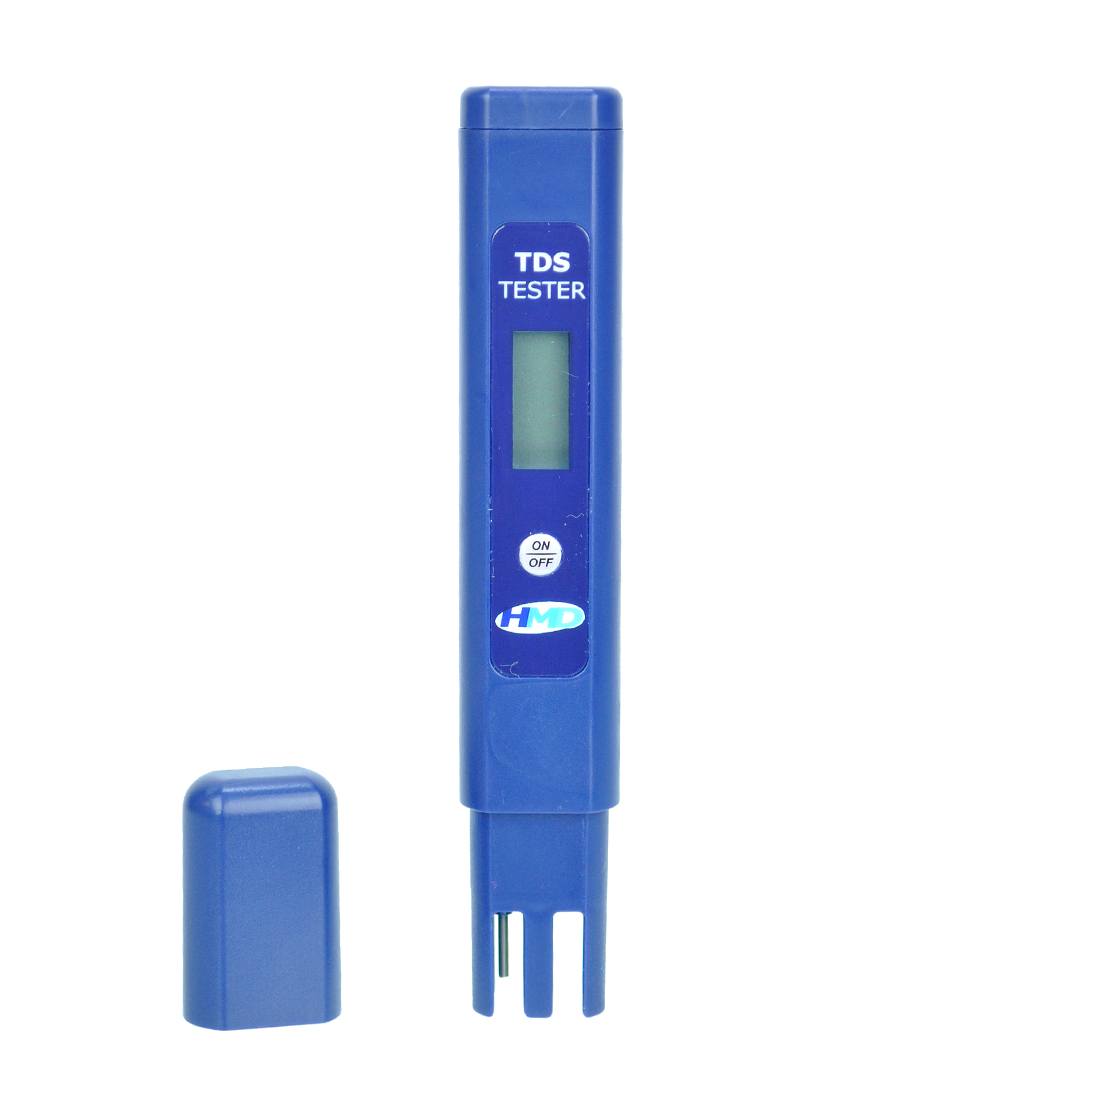 HM Digital Handheld TDS Meter - Front View With Detached Bottom View